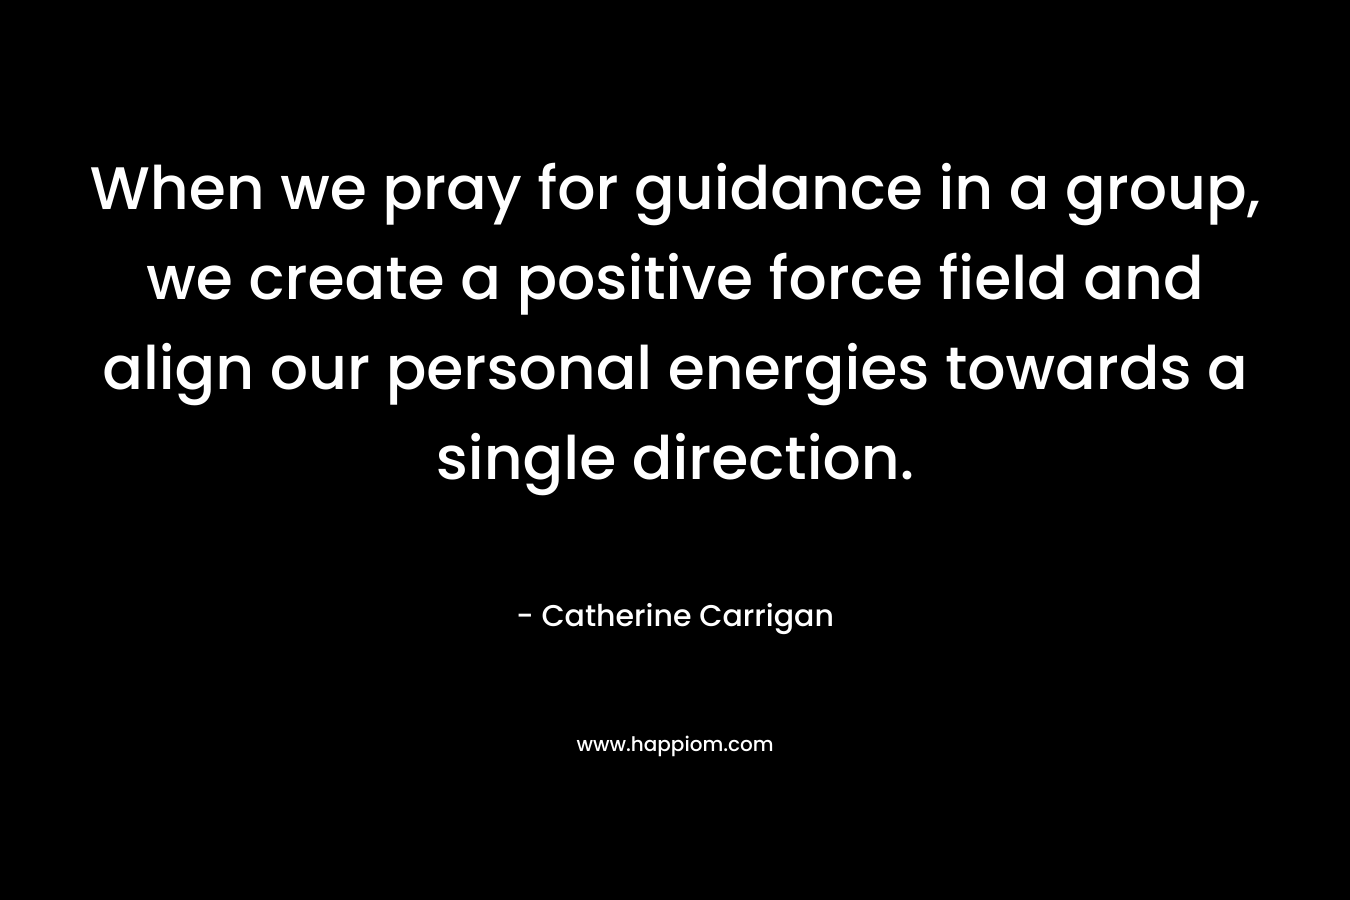 When we pray for guidance in a group, we create a positive force field and align our personal energies towards a single direction.